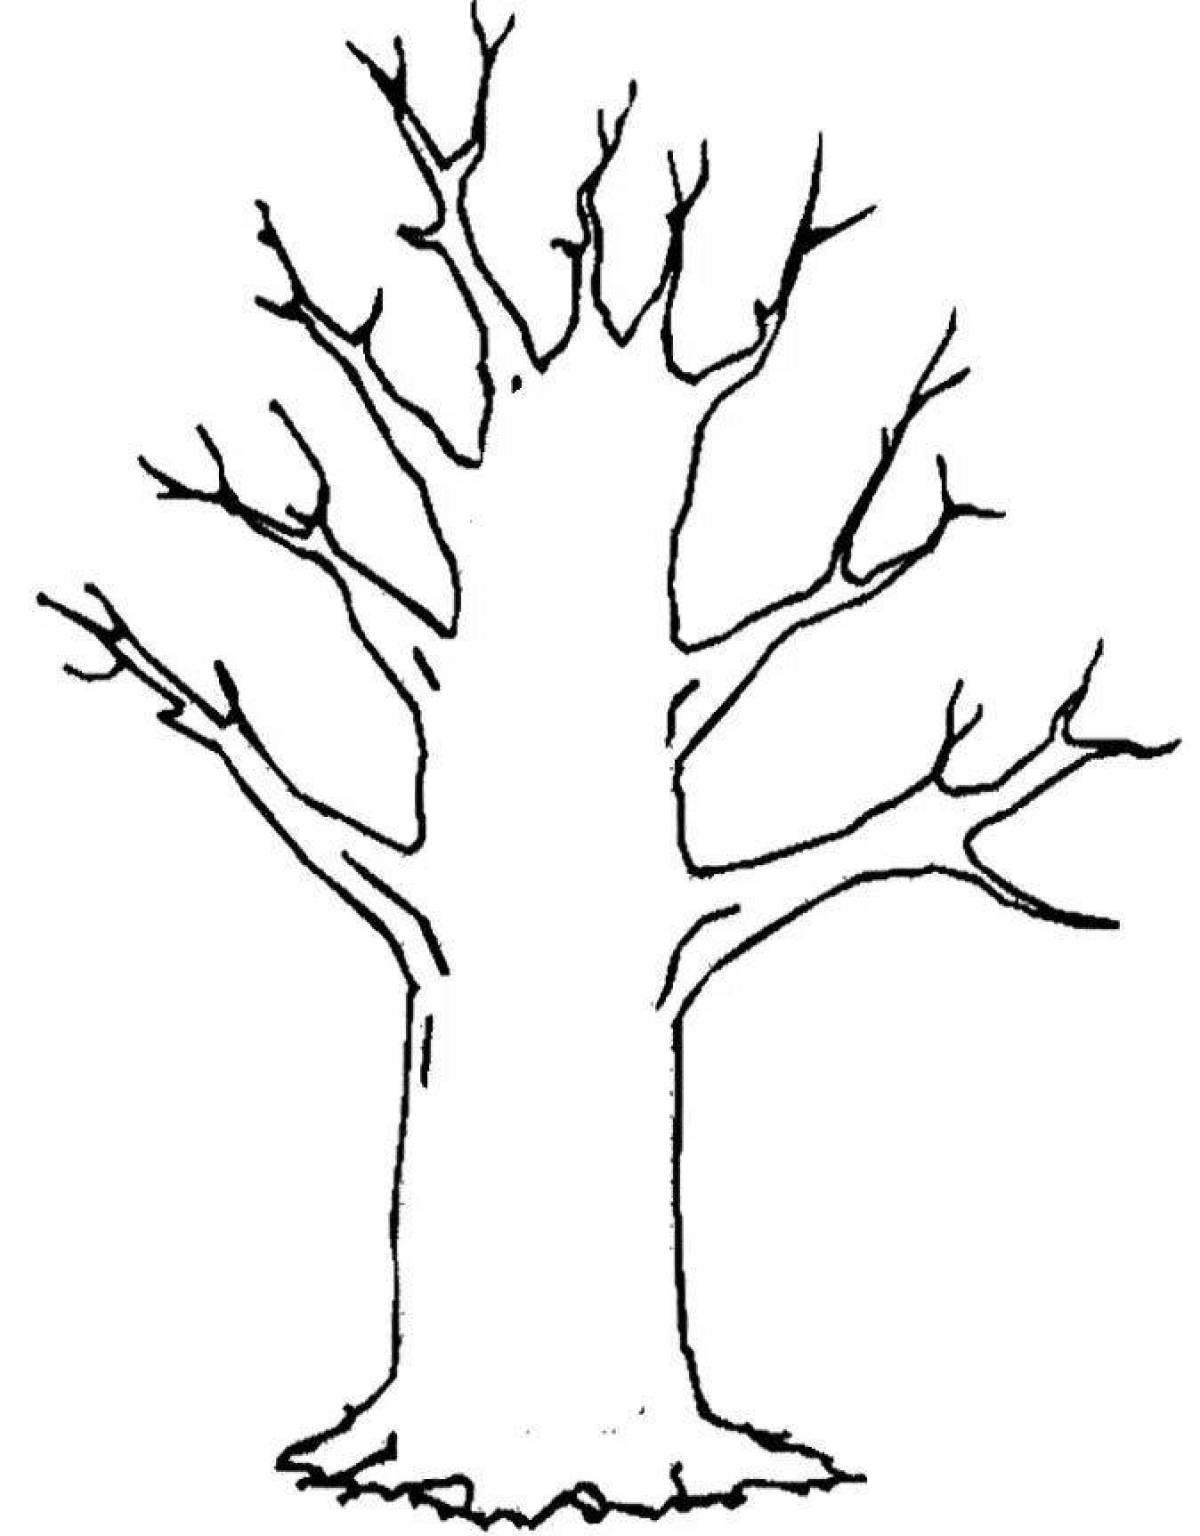 Living tree without leaves for children 3-4 years old